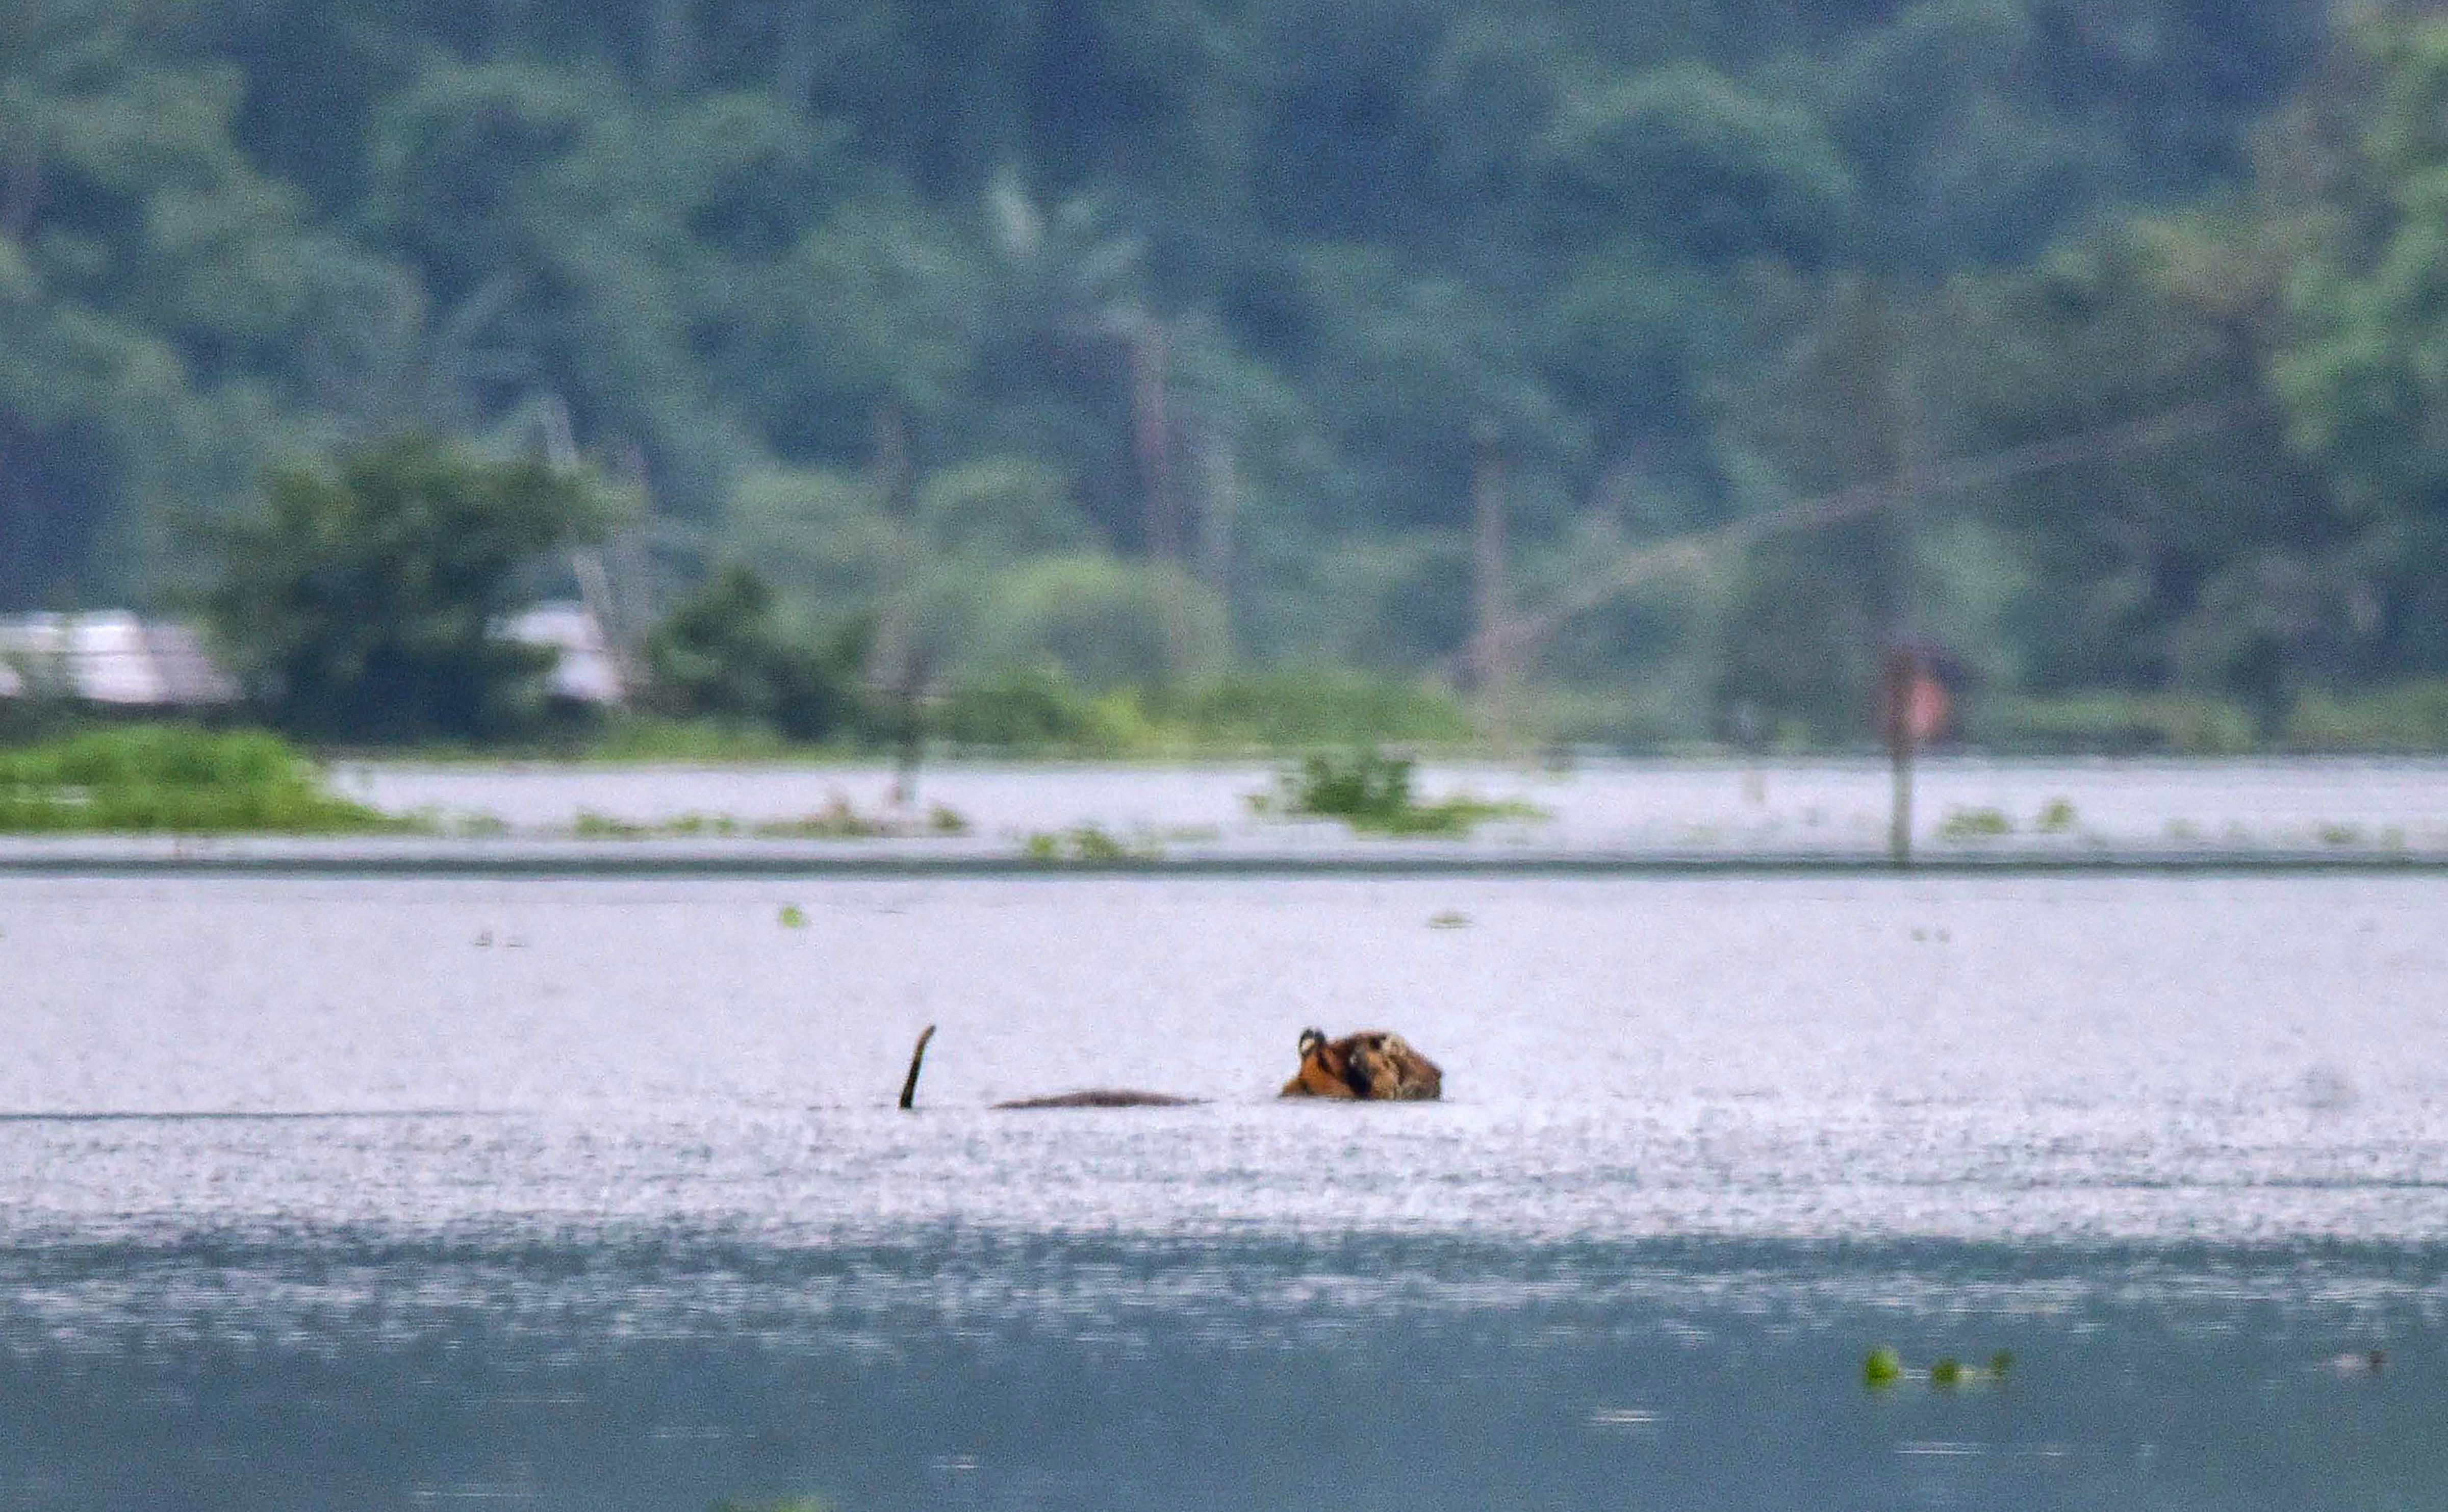 A tiger wades through a flooded area in search of higher land near Kaziranga National Park. Credit: PTI